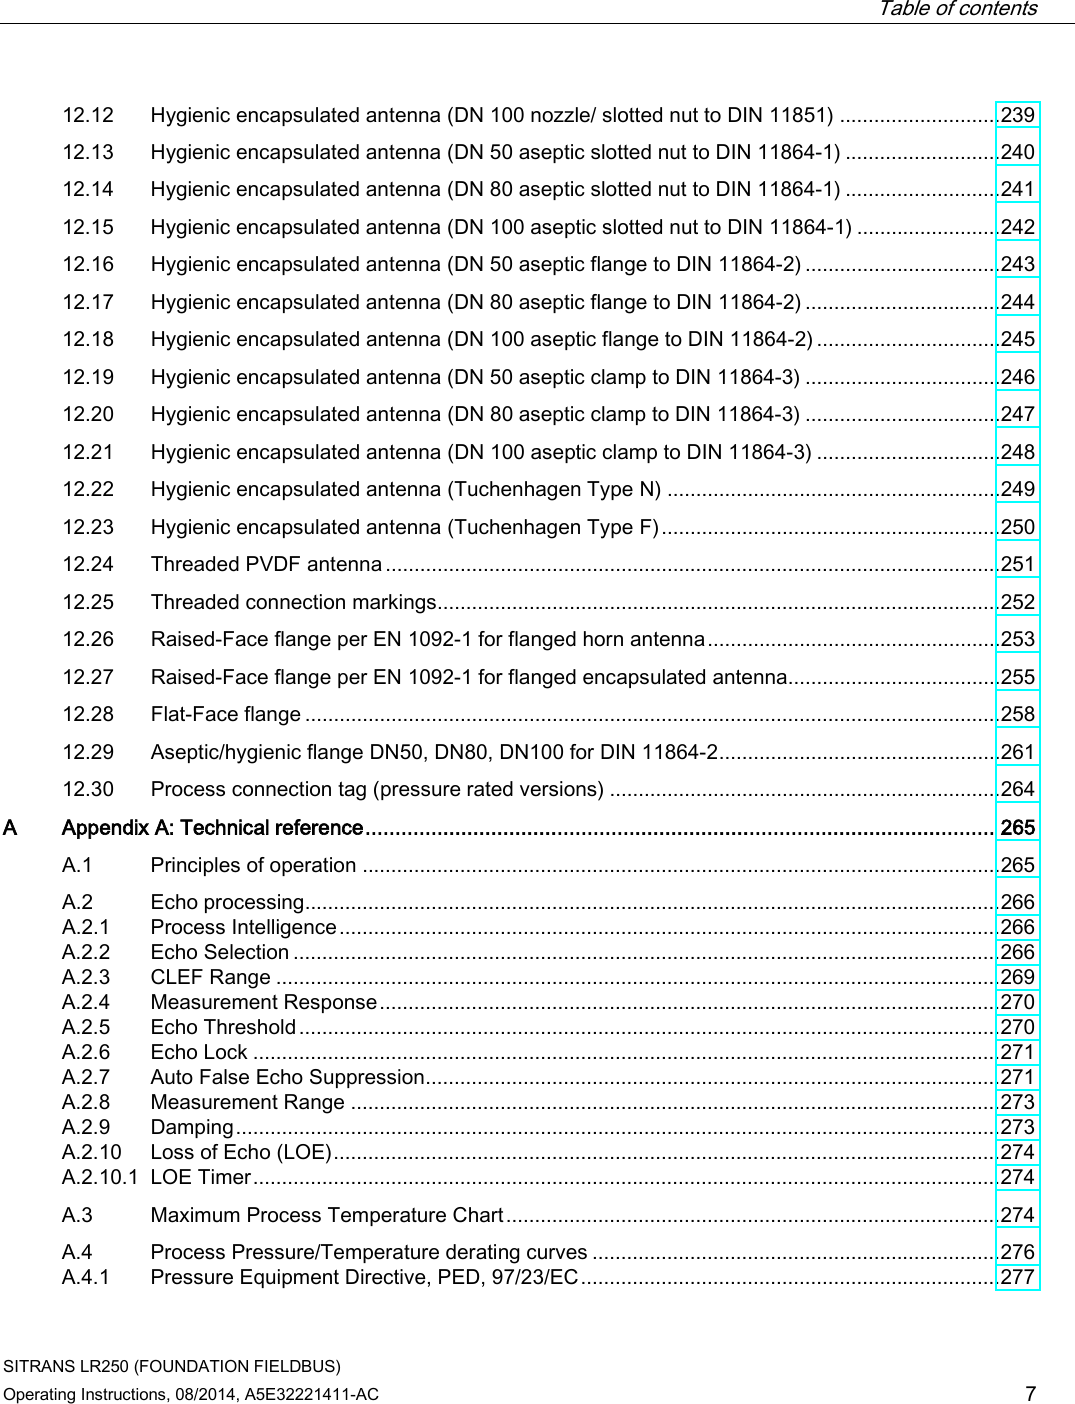  Table of contents   SITRANS LR250 (FOUNDATION FIELDBUS) Operating Instructions, 08/2014, A5E32221411-AC 7 12.12 Hygienic encapsulated antenna (DN 100 nozzle/ slotted nut to DIN 11851) ............................ 239 12.13 Hygienic encapsulated antenna (DN 50 aseptic slotted nut to DIN 11864-1) ........................... 240 12.14 Hygienic encapsulated antenna (DN 80 aseptic slotted nut to DIN 11864-1) ........................... 241 12.15 Hygienic encapsulated antenna (DN 100 aseptic slotted nut to DIN 11864-1) ......................... 242 12.16 Hygienic encapsulated antenna (DN 50 aseptic flange to DIN 11864-2) .................................. 243 12.17 Hygienic encapsulated antenna (DN 80 aseptic flange to DIN 11864-2) .................................. 244 12.18 Hygienic encapsulated antenna (DN 100 aseptic flange to DIN 11864-2) ................................ 245 12.19 Hygienic encapsulated antenna (DN 50 aseptic clamp to DIN 11864-3) .................................. 246 12.20 Hygienic encapsulated antenna (DN 80 aseptic clamp to DIN 11864-3) .................................. 247 12.21 Hygienic encapsulated antenna (DN 100 aseptic clamp to DIN 11864-3) ................................ 248 12.22 Hygienic encapsulated antenna (Tuchenhagen Type N) .......................................................... 249 12.23 Hygienic encapsulated antenna (Tuchenhagen Type F) ........................................................... 250 12.24 Threaded PVDF antenna ........................................................................................................... 251 12.25 Threaded connection markings .................................................................................................. 252 12.26 Raised-Face flange per EN 1092-1 for flanged horn antenna ................................................... 253 12.27 Raised-Face flange per EN 1092-1 for flanged encapsulated antenna..................................... 255 12.28 Flat-Face flange ......................................................................................................................... 258 12.29 Aseptic/hygienic flange DN50, DN80, DN100 for DIN 11864-2 ................................................. 261 12.30 Process connection tag (pressure rated versions) .................................................................... 264 A  Appendix A: Technical reference ......................................................................................................... 265 A.1 Principles of operation ............................................................................................................... 265 A.2 Echo processing......................................................................................................................... 266 A.2.1 Process Intelligence ................................................................................................................... 266 A.2.2 Echo Selection ........................................................................................................................... 266 A.2.3 CLEF Range .............................................................................................................................. 269 A.2.4 Measurement Response ............................................................................................................ 270 A.2.5 Echo Threshold .......................................................................................................................... 270 A.2.6 Echo Lock .................................................................................................................................. 271 A.2.7 Auto False Echo Suppression .................................................................................................... 271 A.2.8 Measurement Range ................................................................................................................. 273 A.2.9 Damping ..................................................................................................................................... 273 A.2.10 Loss of Echo (LOE) .................................................................................................................... 274 A.2.10.1 LOE Timer .................................................................................................................................. 274 A.3 Maximum Process Temperature Chart ...................................................................................... 274 A.4 Process Pressure/Temperature derating curves ....................................................................... 276 A.4.1 Pressure Equipment Directive, PED, 97/23/EC ......................................................................... 277 